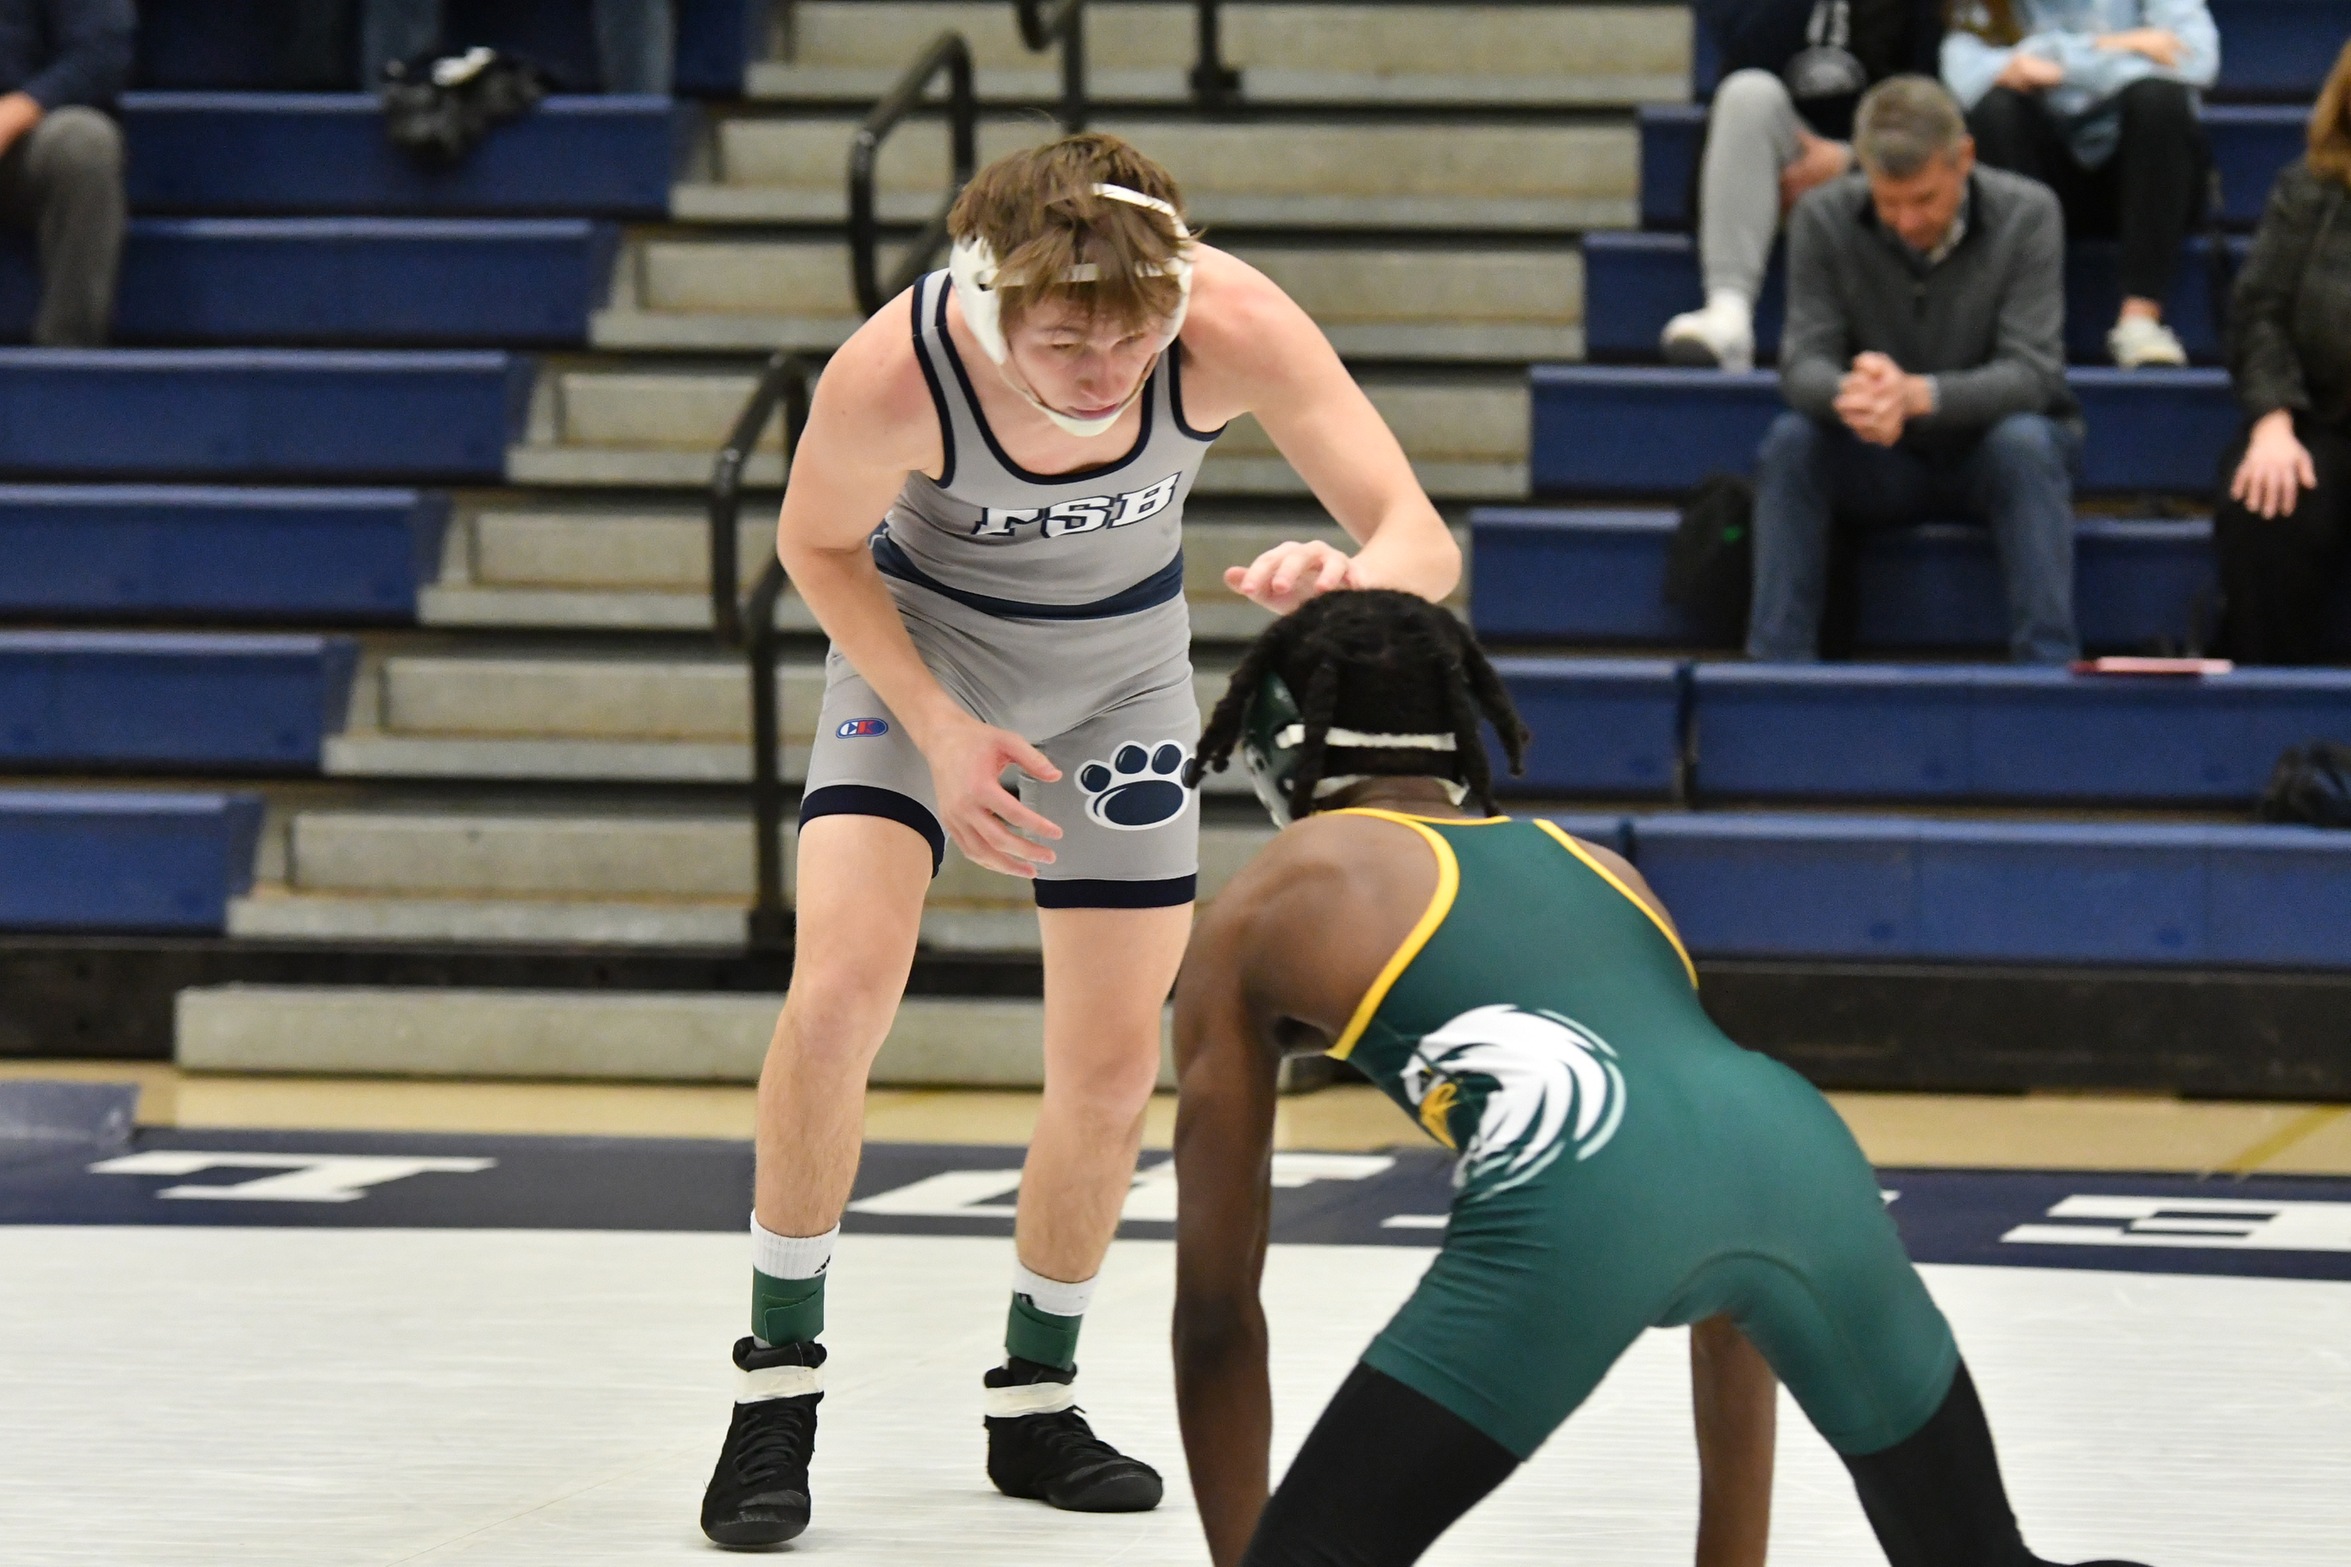 Dellinger Wins at 125; Lions Fall to Gannon